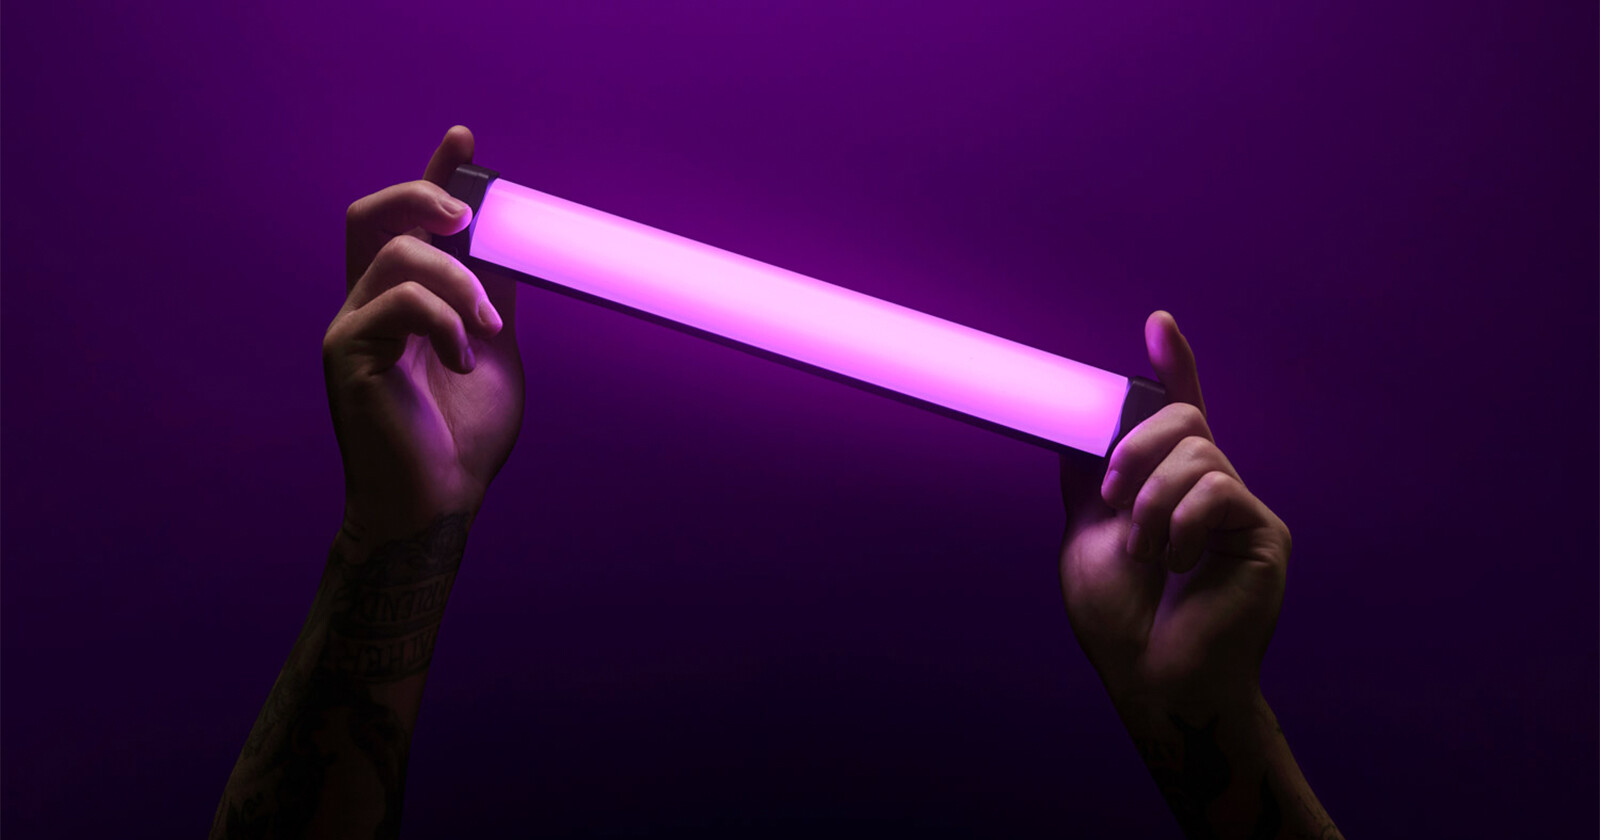 Lume Cubes New RGB Tube Lights Put High Quality Illumination in Your Hands